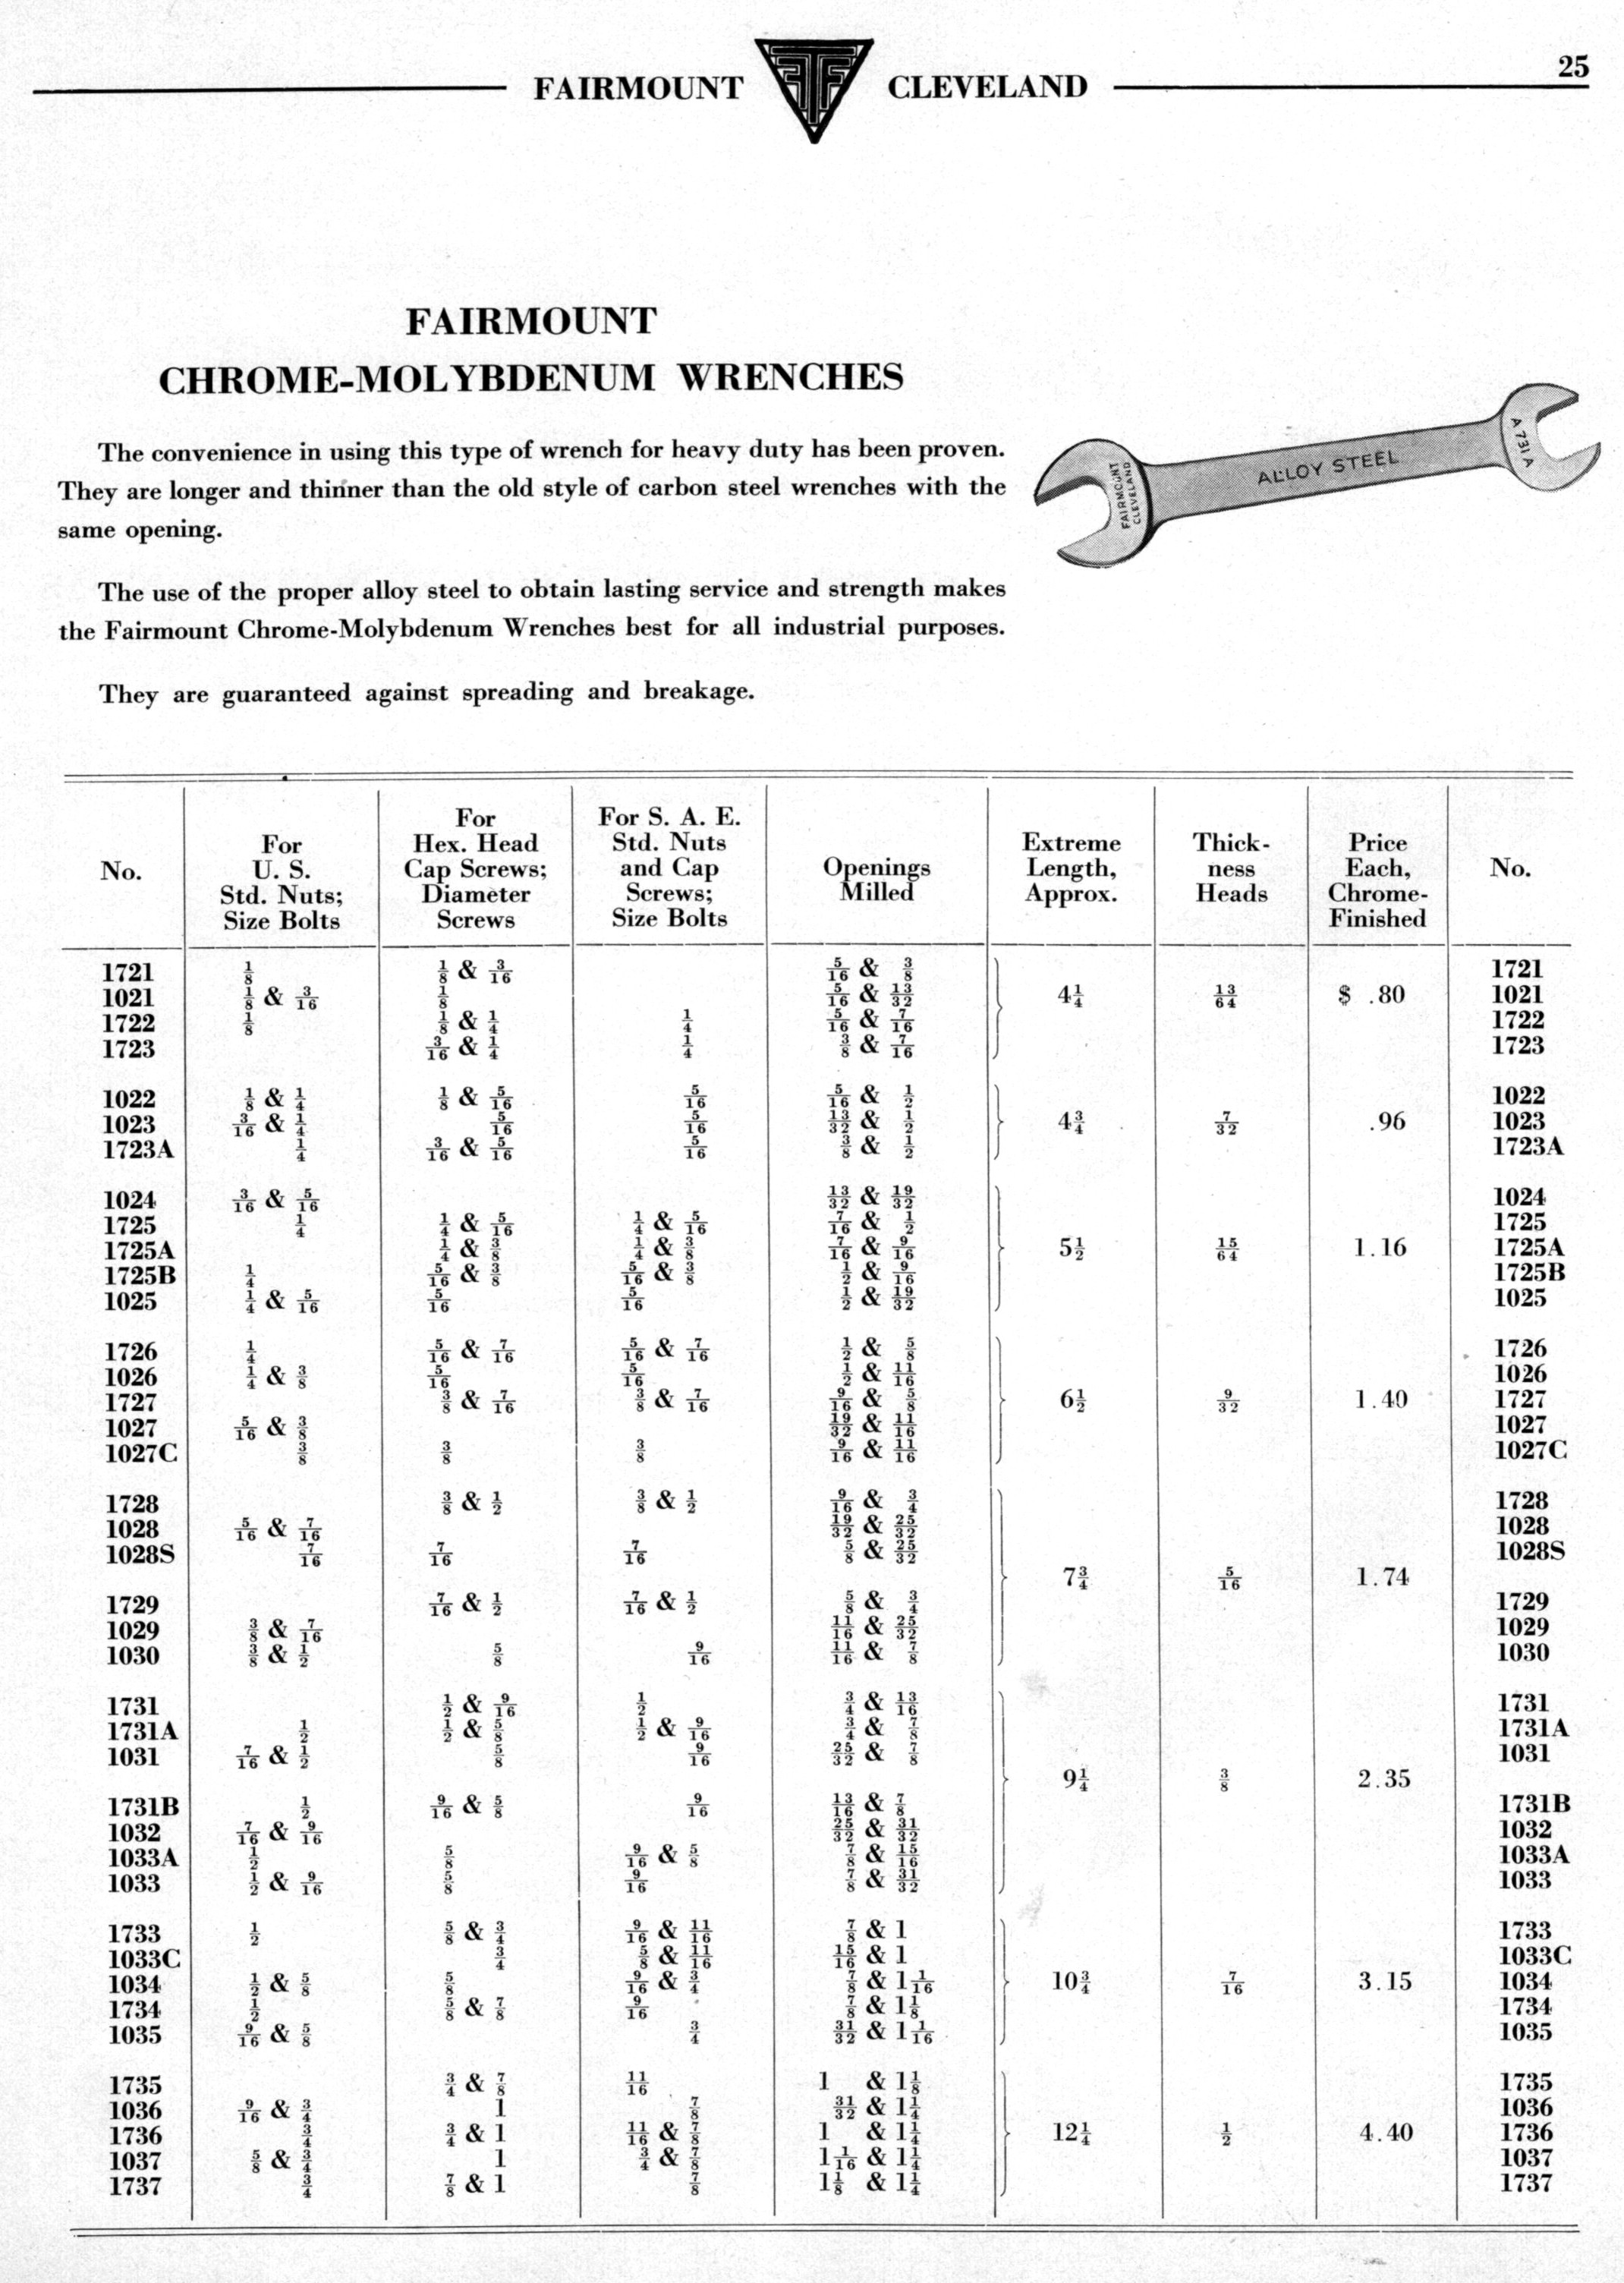 http://alloy-artifacts.org/Photos/tools/scans/fairmount_cat_335_1933_p25_crmo_wrenches_cropped.jpg